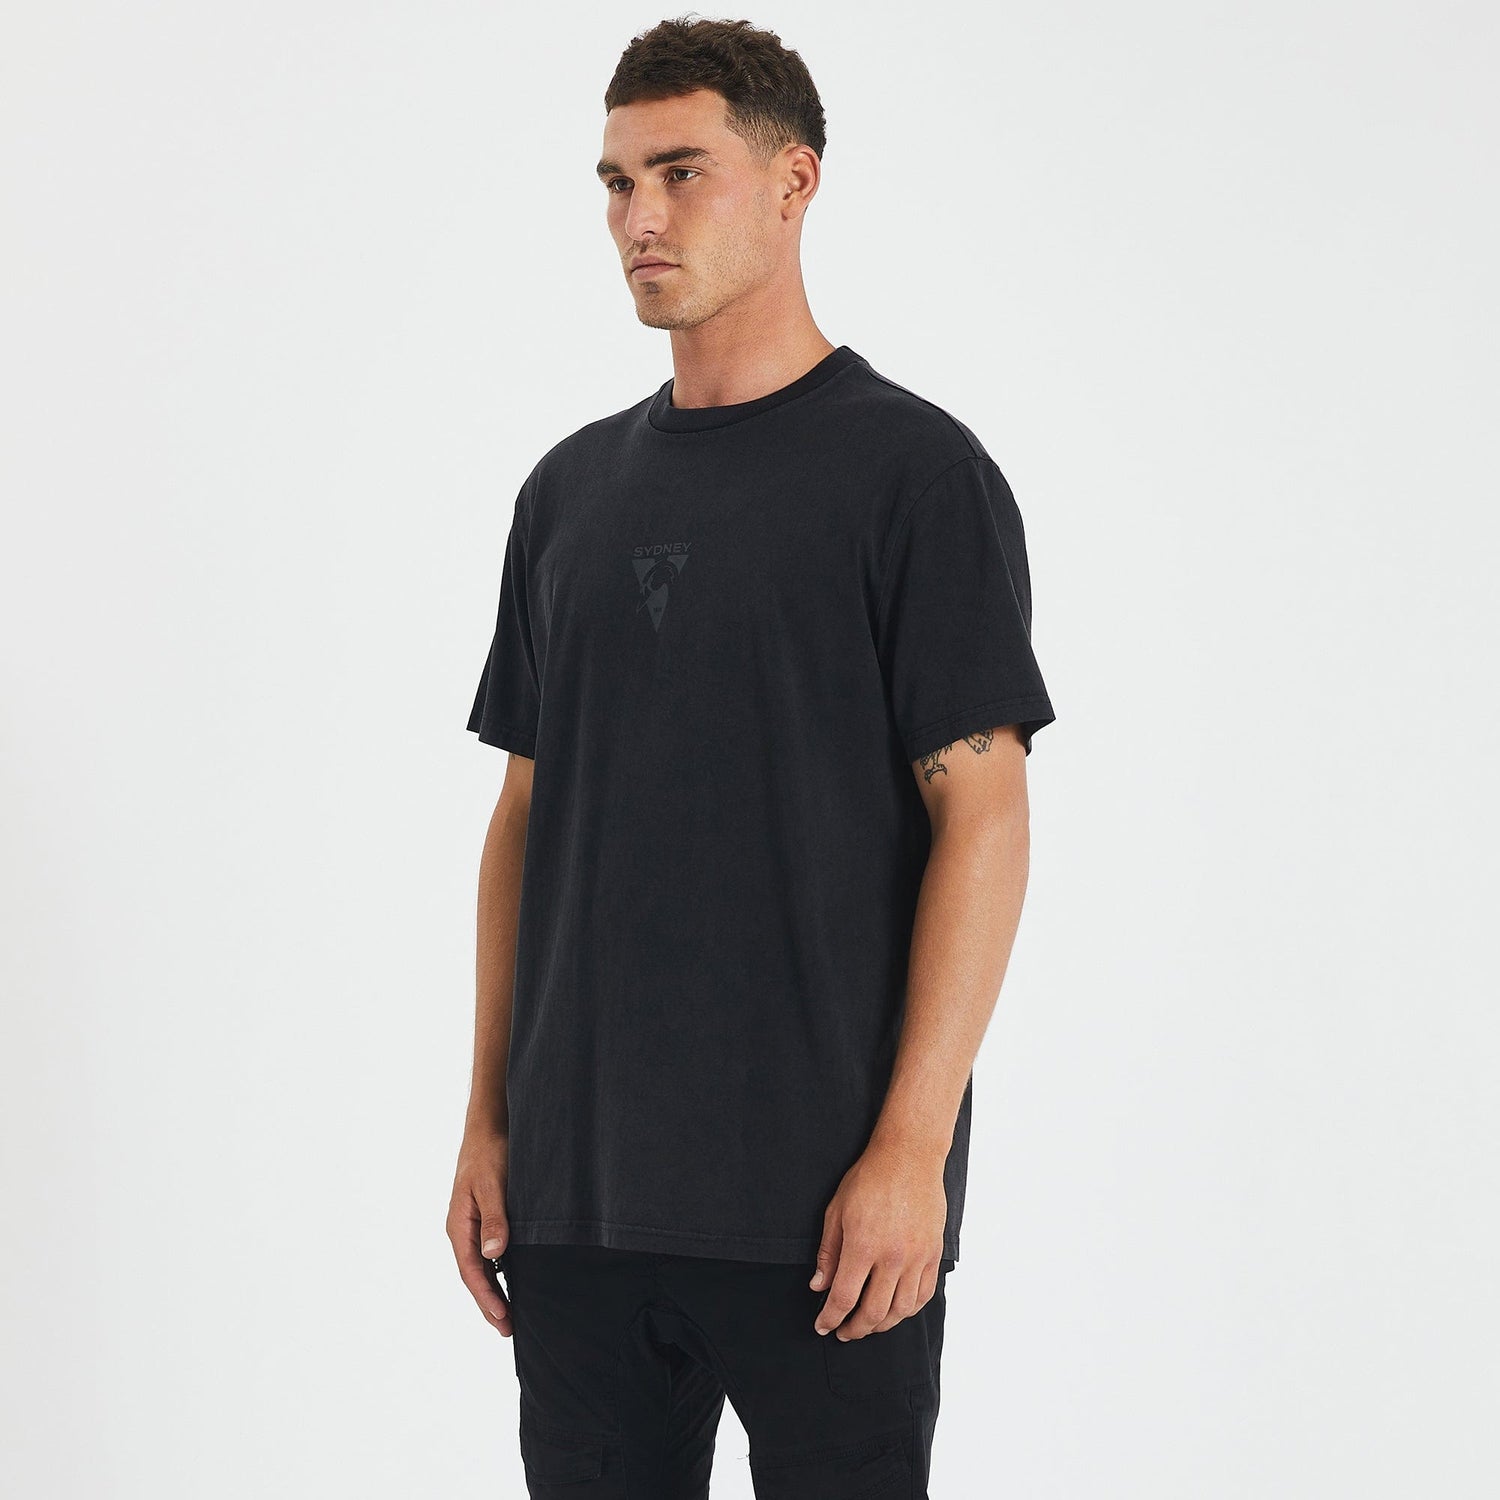 Sydney Swans Relaxed Fit T-Shirt Mineral Black